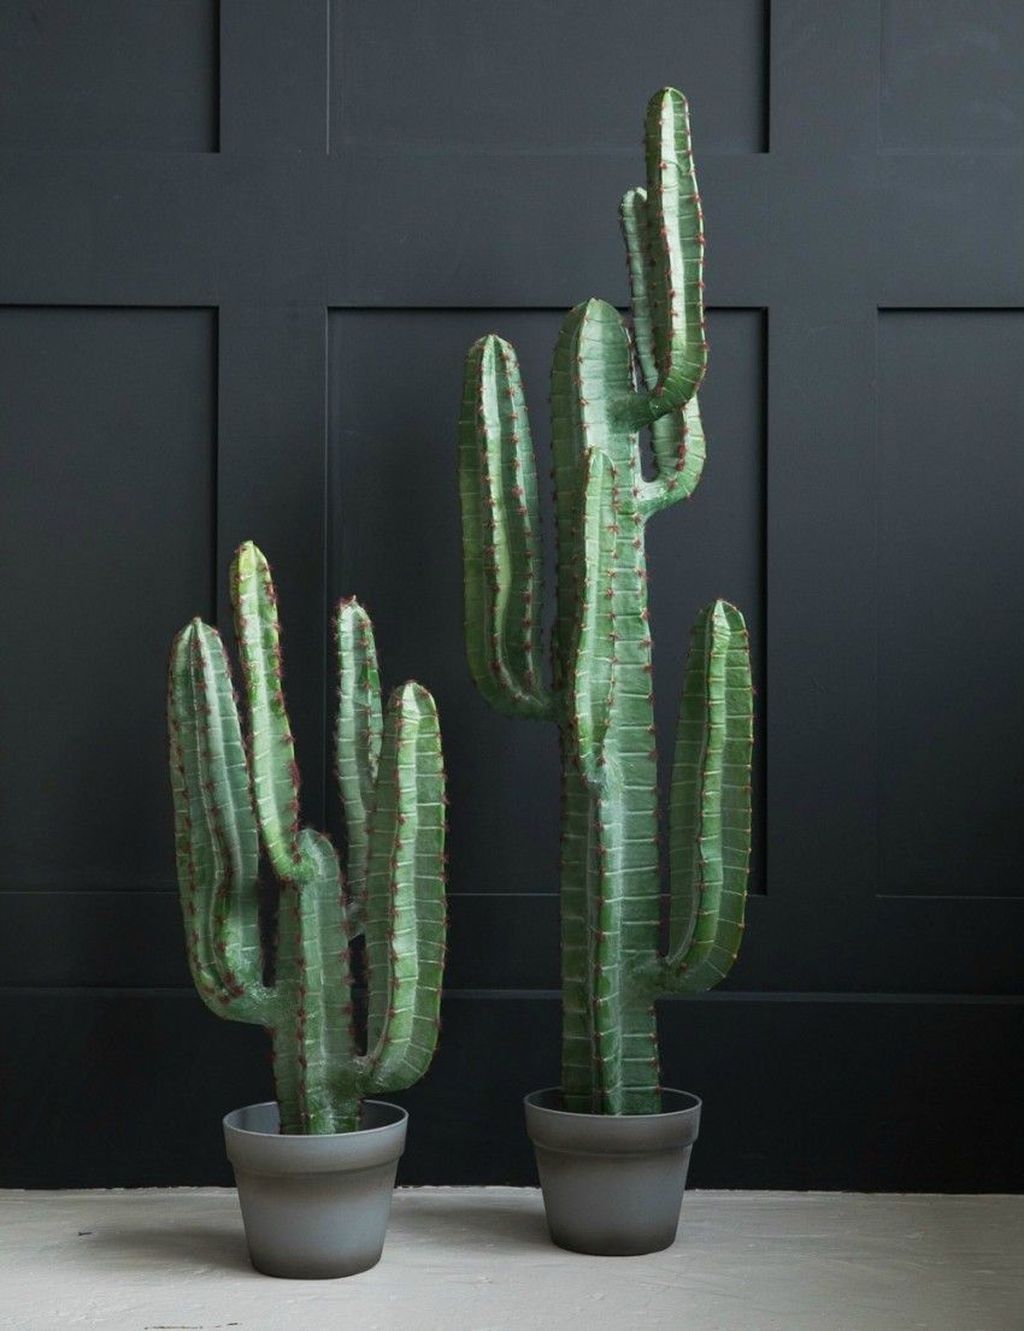 Small cactus -  Cactus plants -  Indoor cactus -  Faux cactus -  Cactus garden -  Cactus house plan -   14 plants Cactus awesome ideas